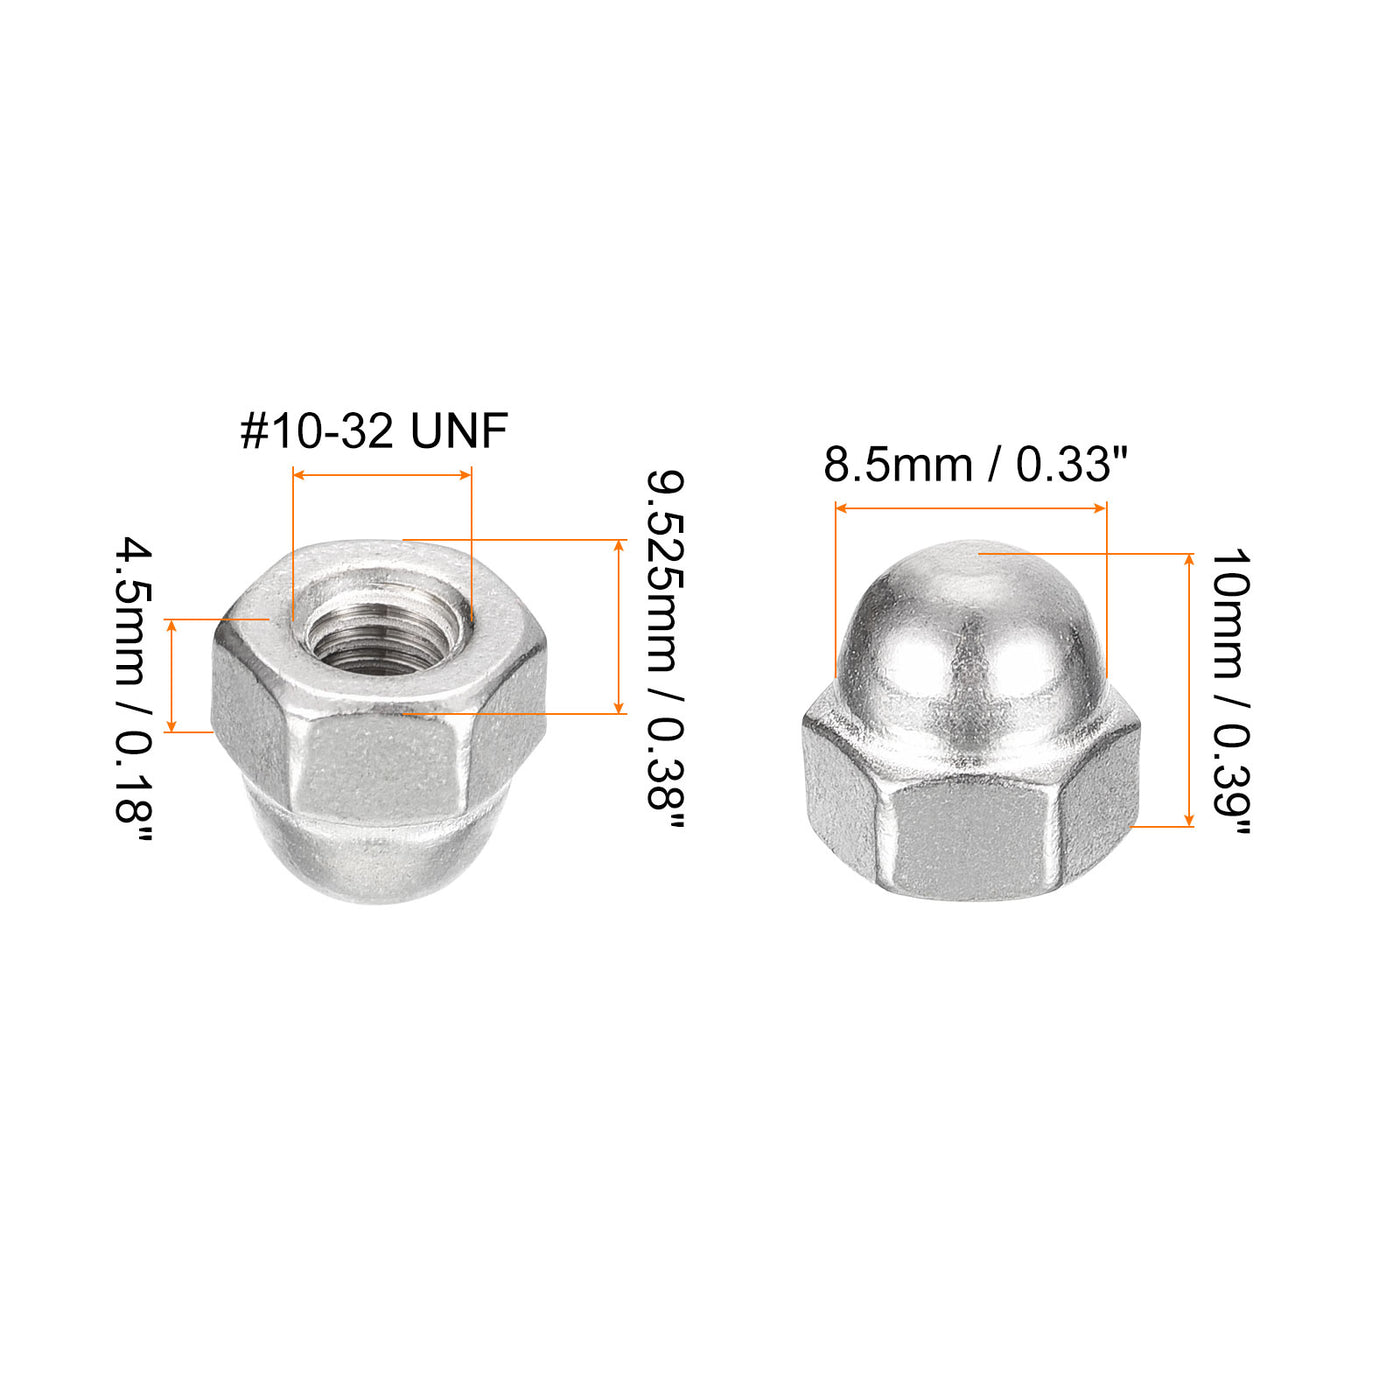 uxcell Uxcell #10-32 Acorn Cap Nuts,25pcs - 304 Stainless Steel Hardware Nuts, Acorn Hex Cap Dome Head Nuts for Fasteners (Silver)